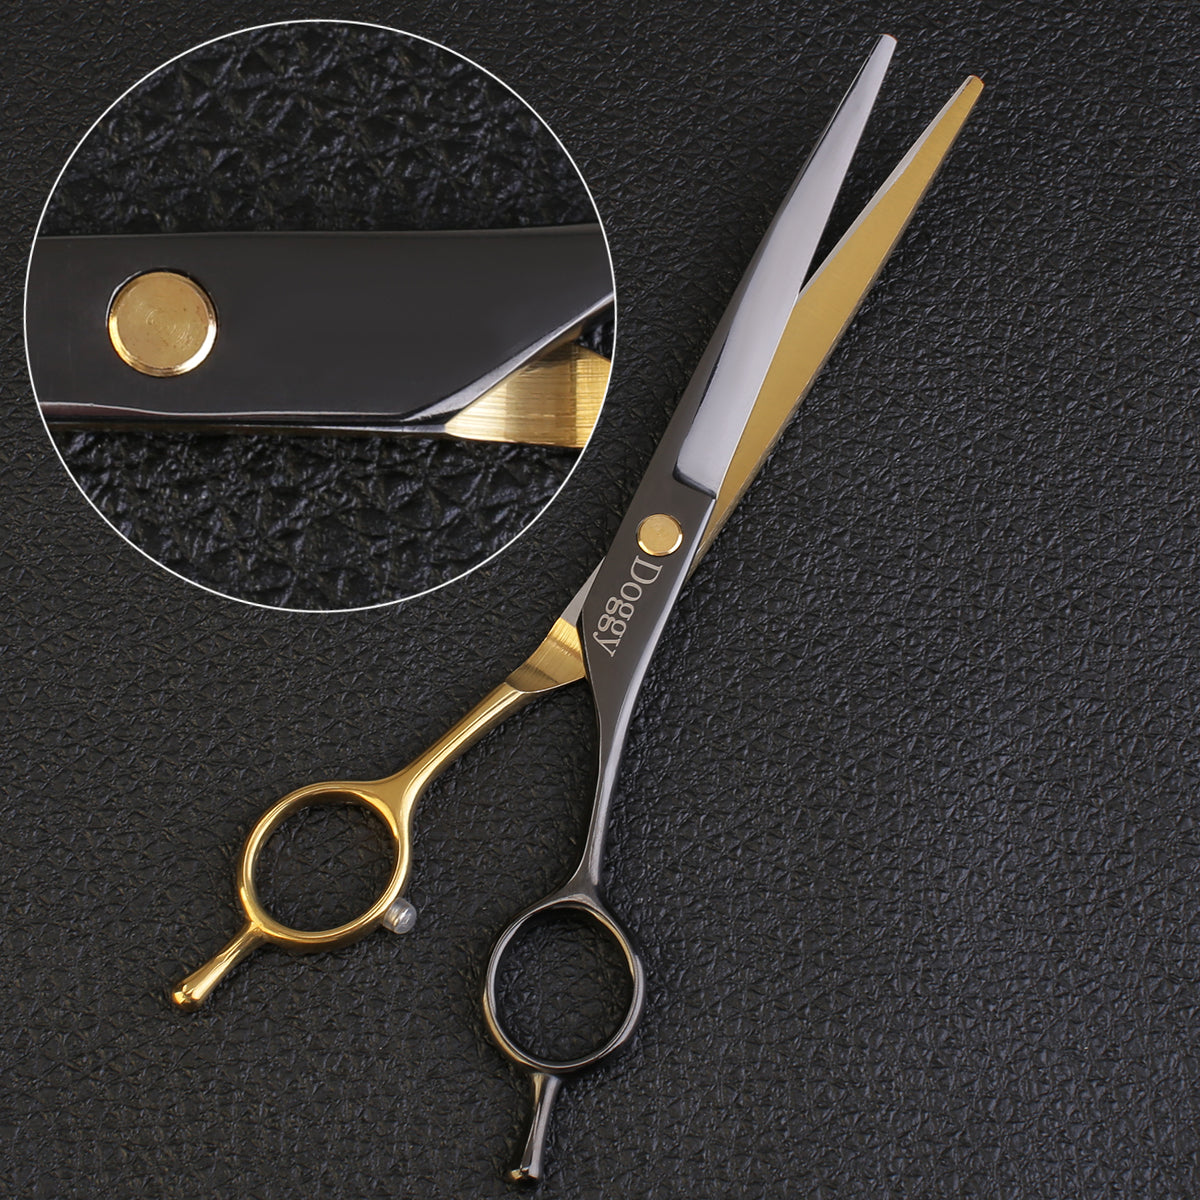 Custom Super Curved Shears Of Grooming Equipment Kit For Dogs DC010